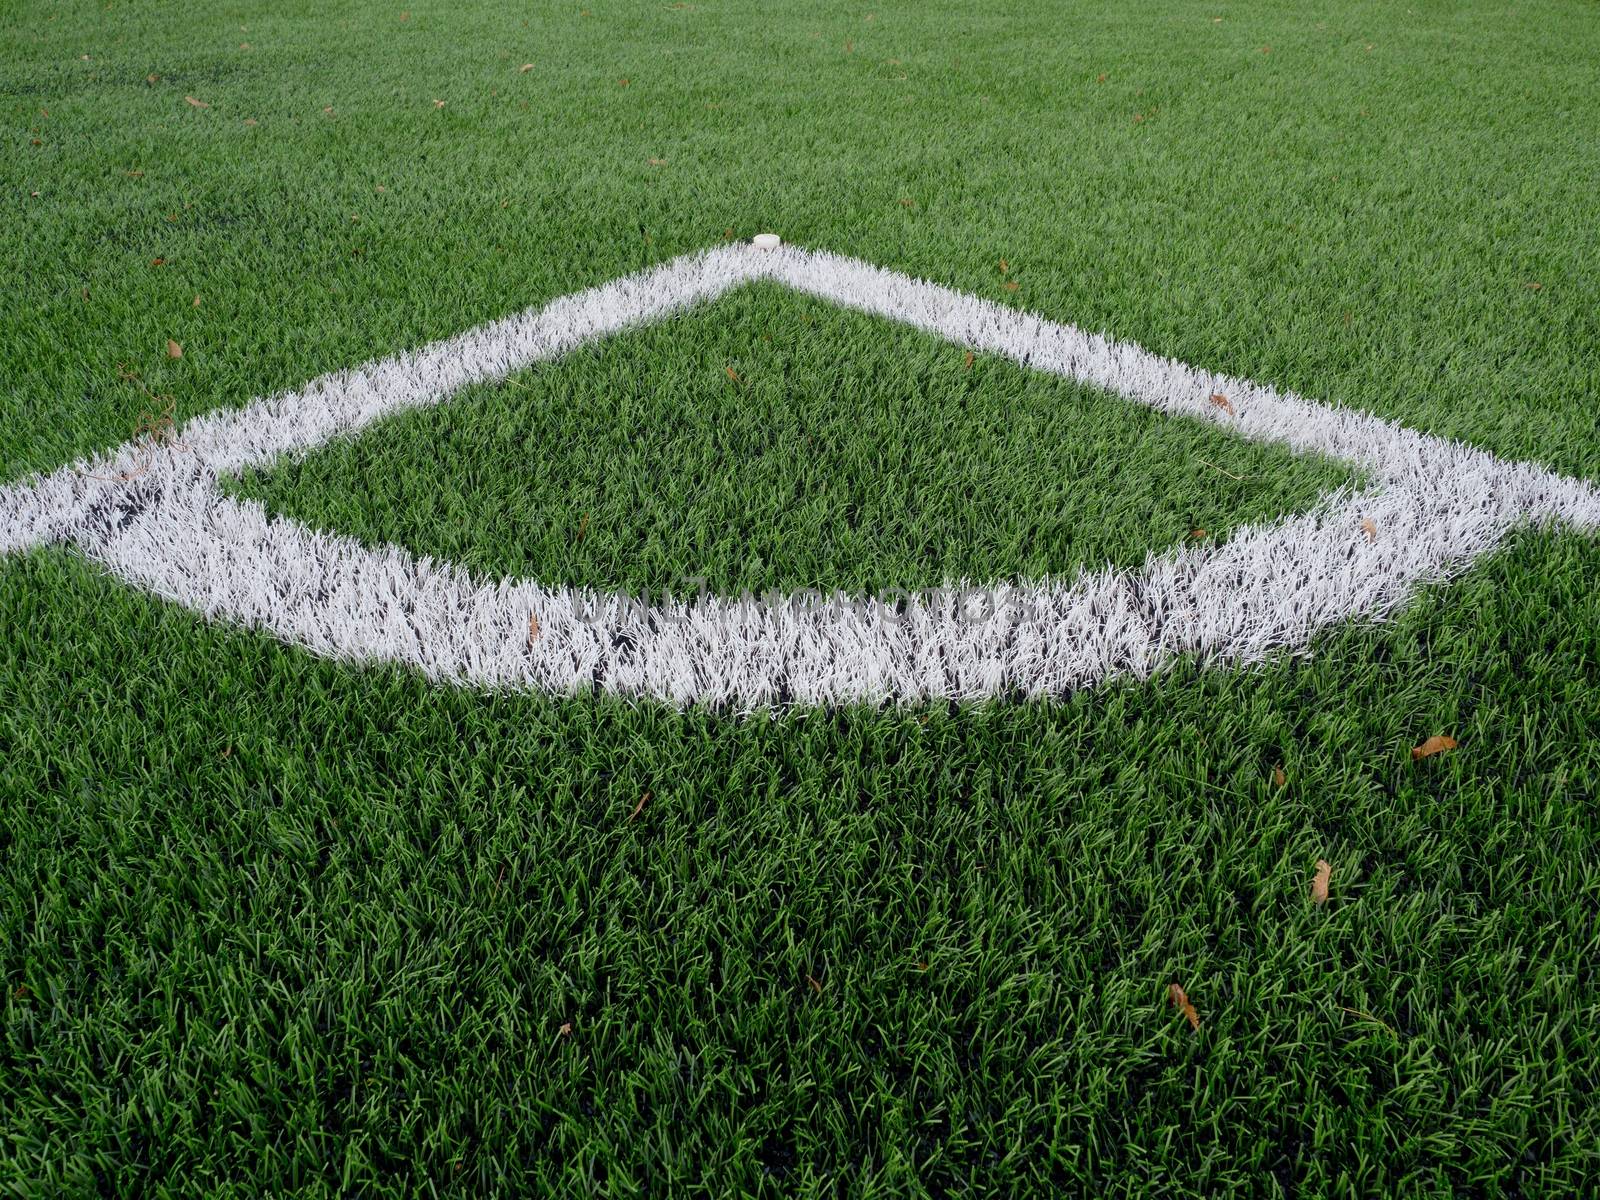 Football playground corner on heated artificial green turf ground with painted white line marks. Milled black rubber in basic of ground.